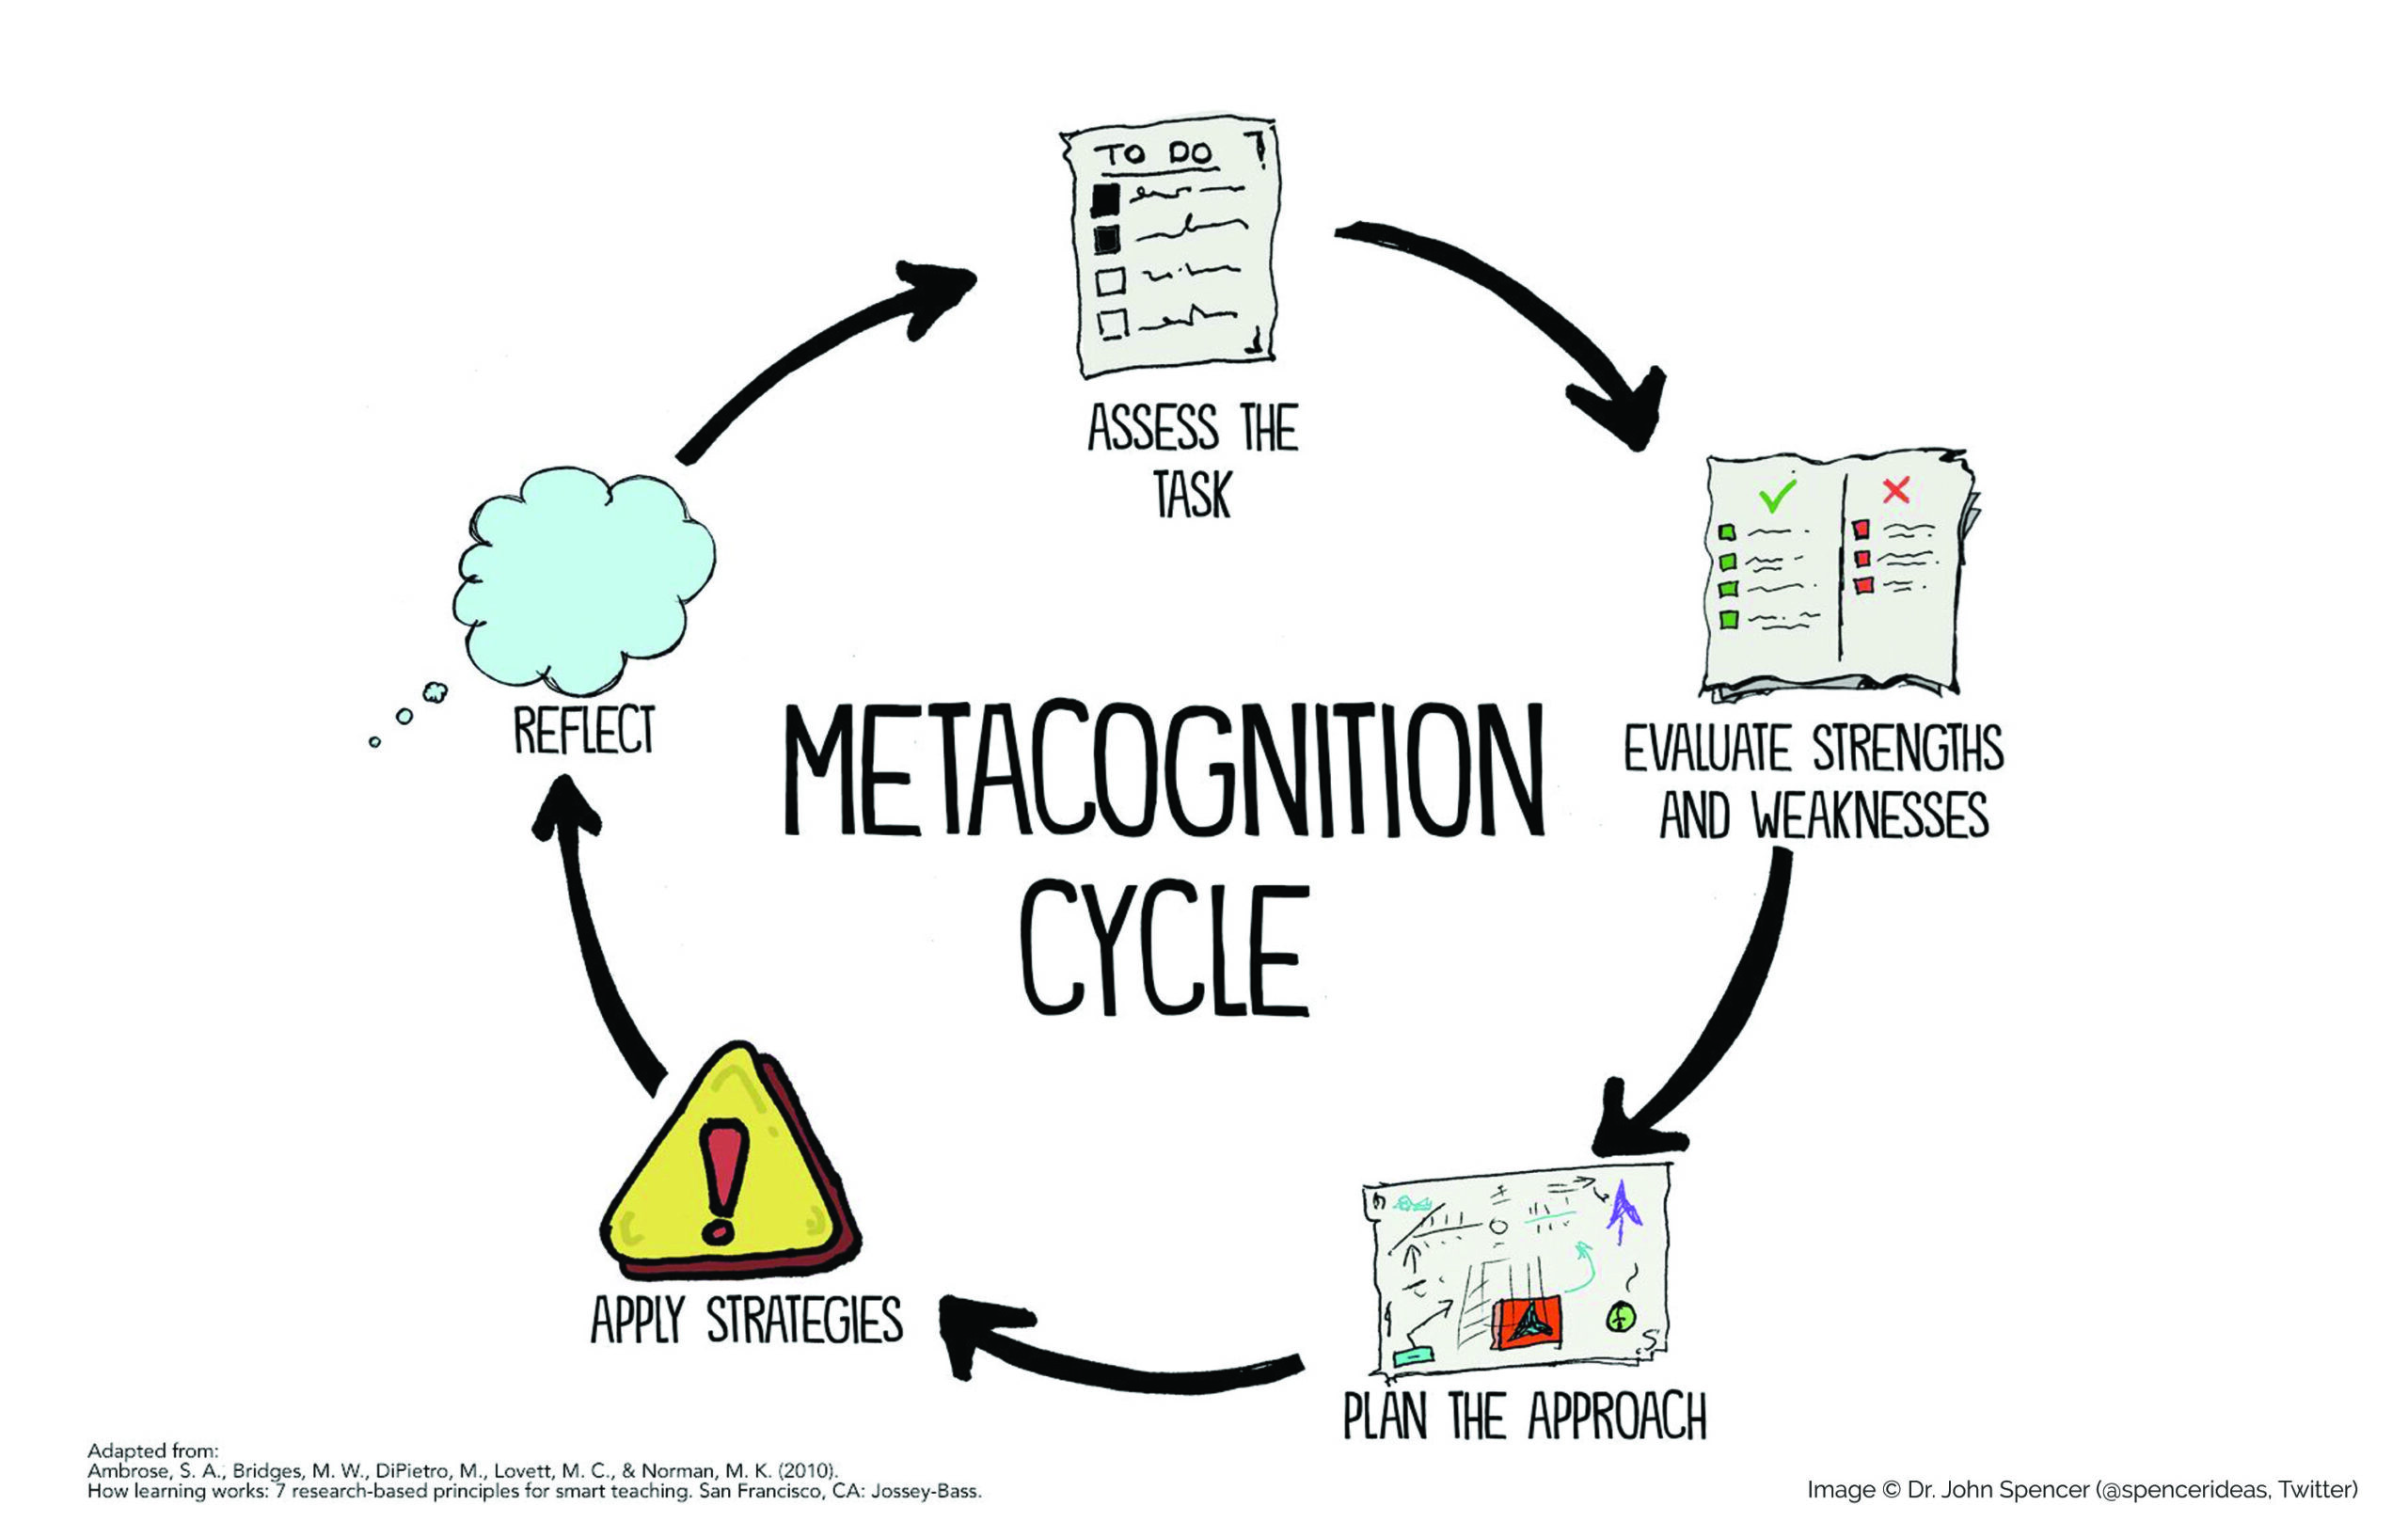 The metacognition cycle